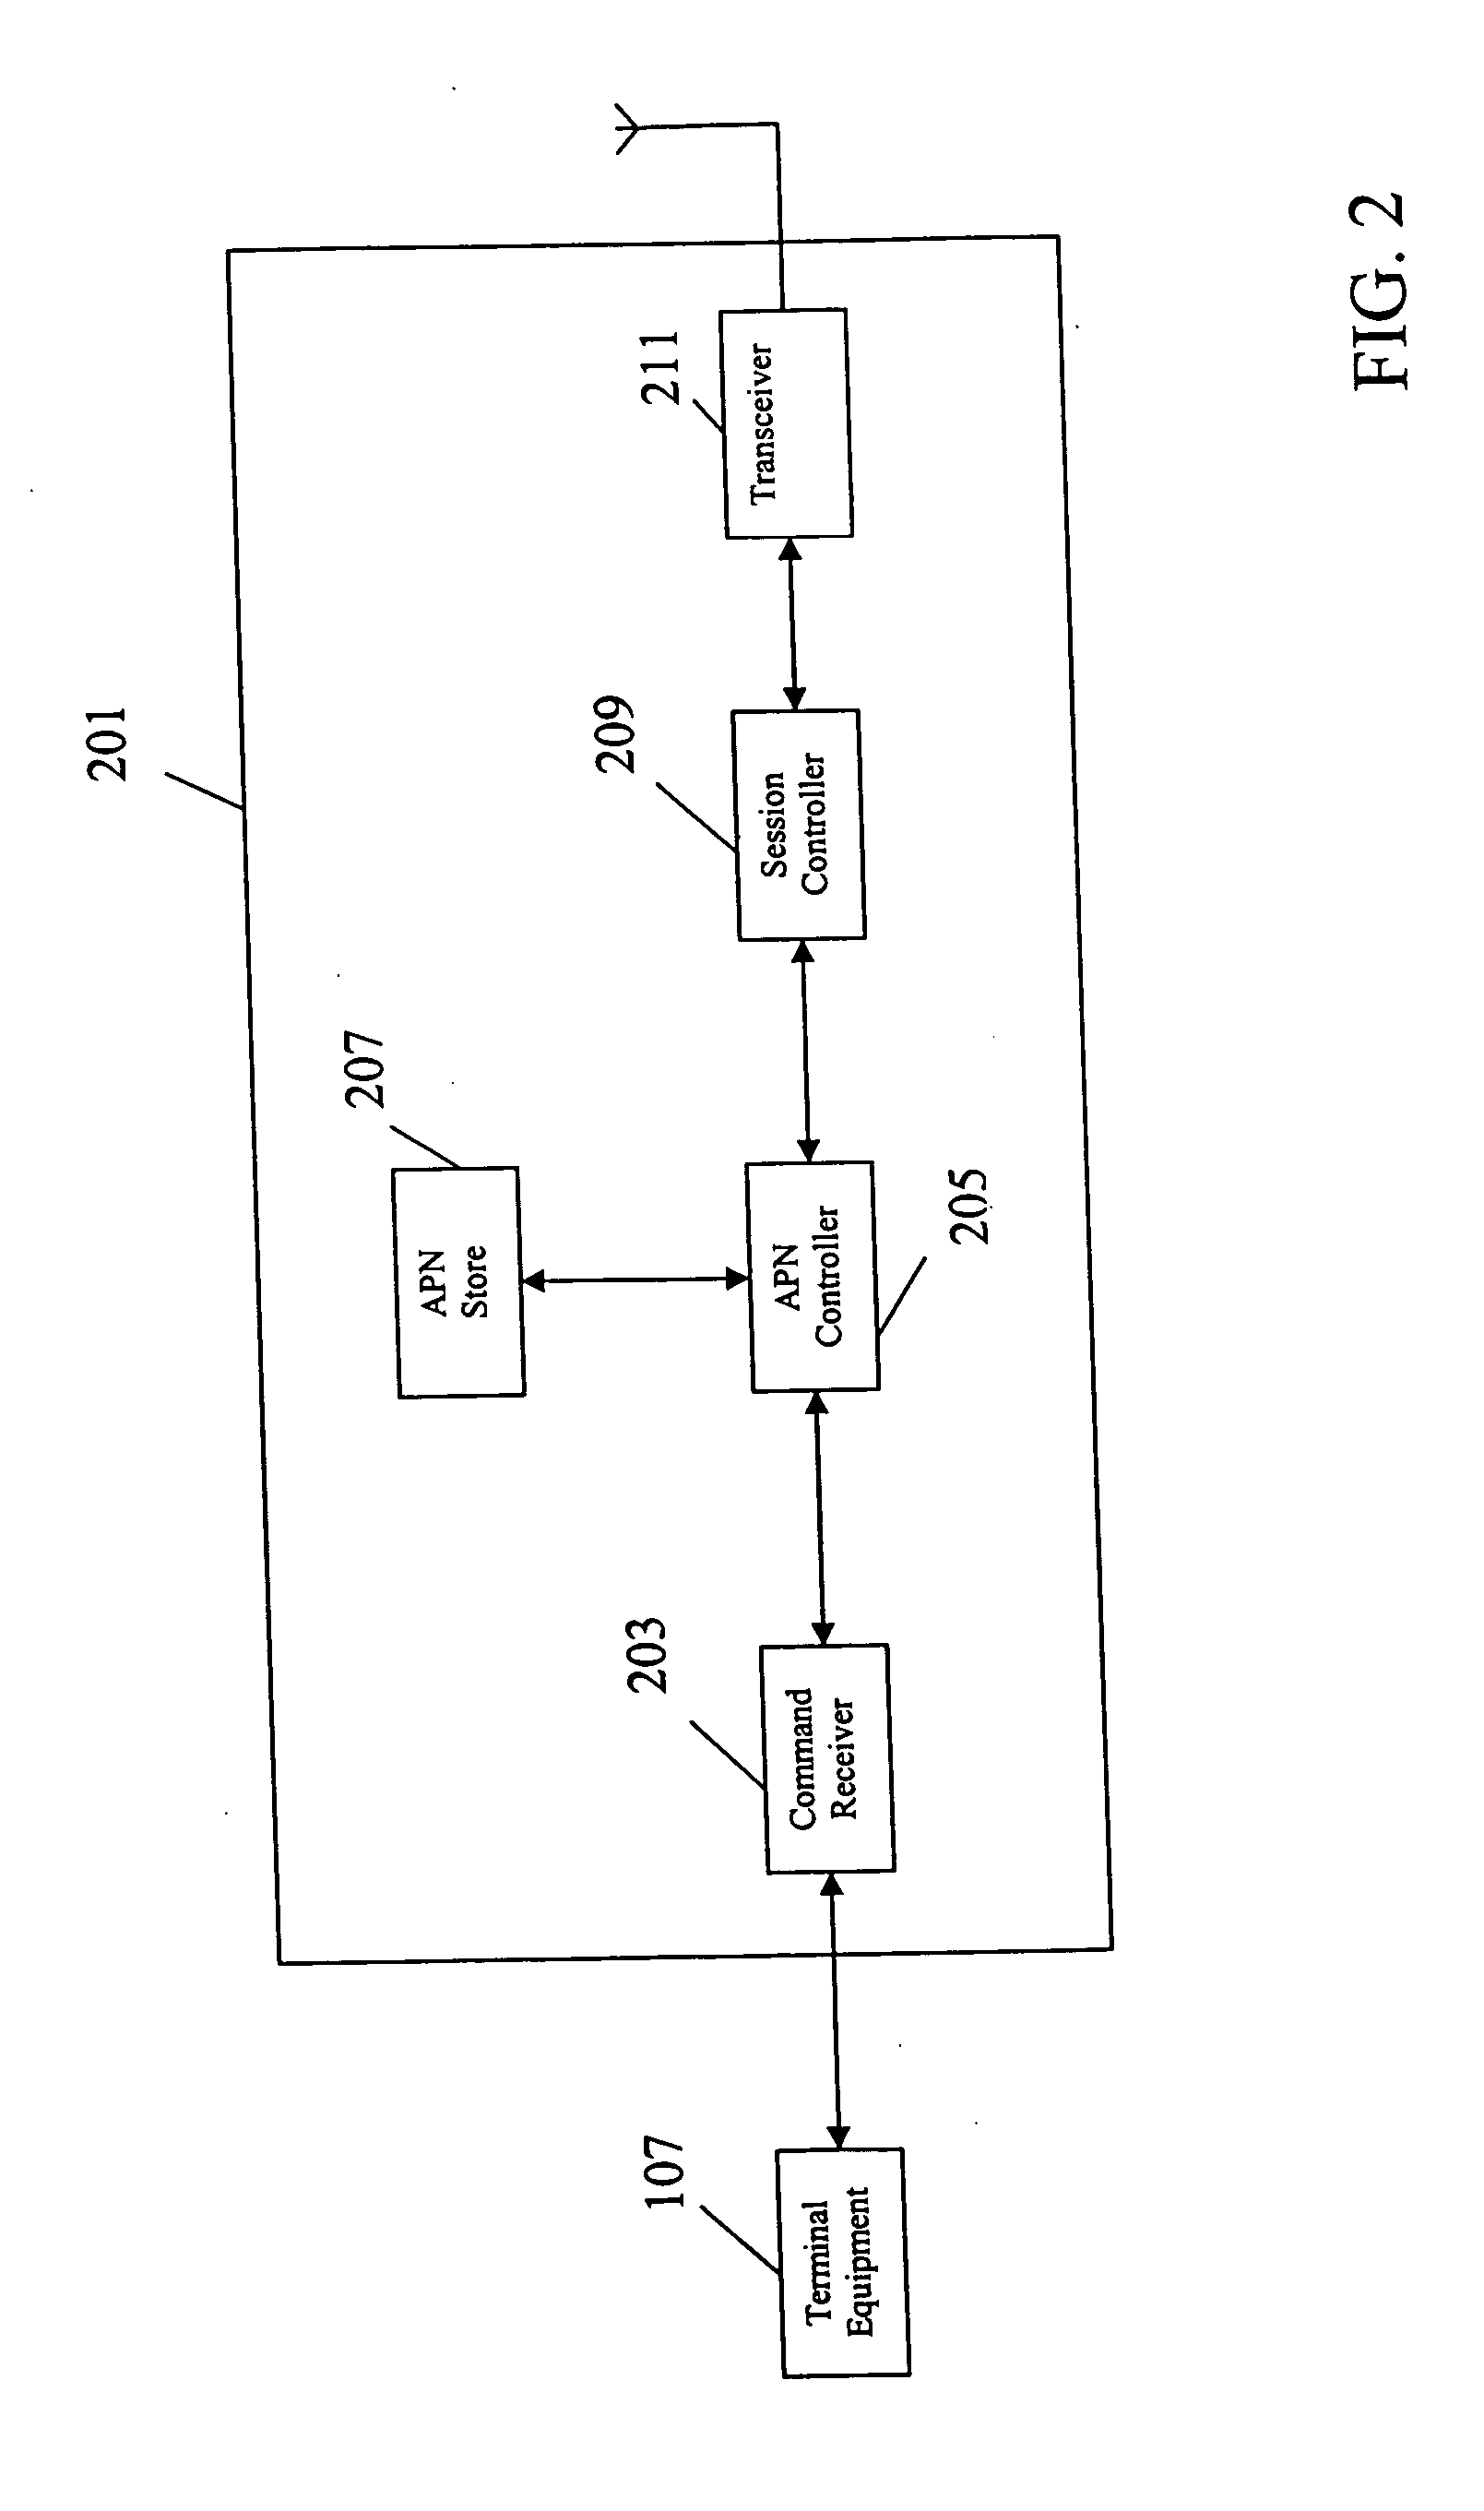 Method and apparatus for accessing a data network through a cellular communication system